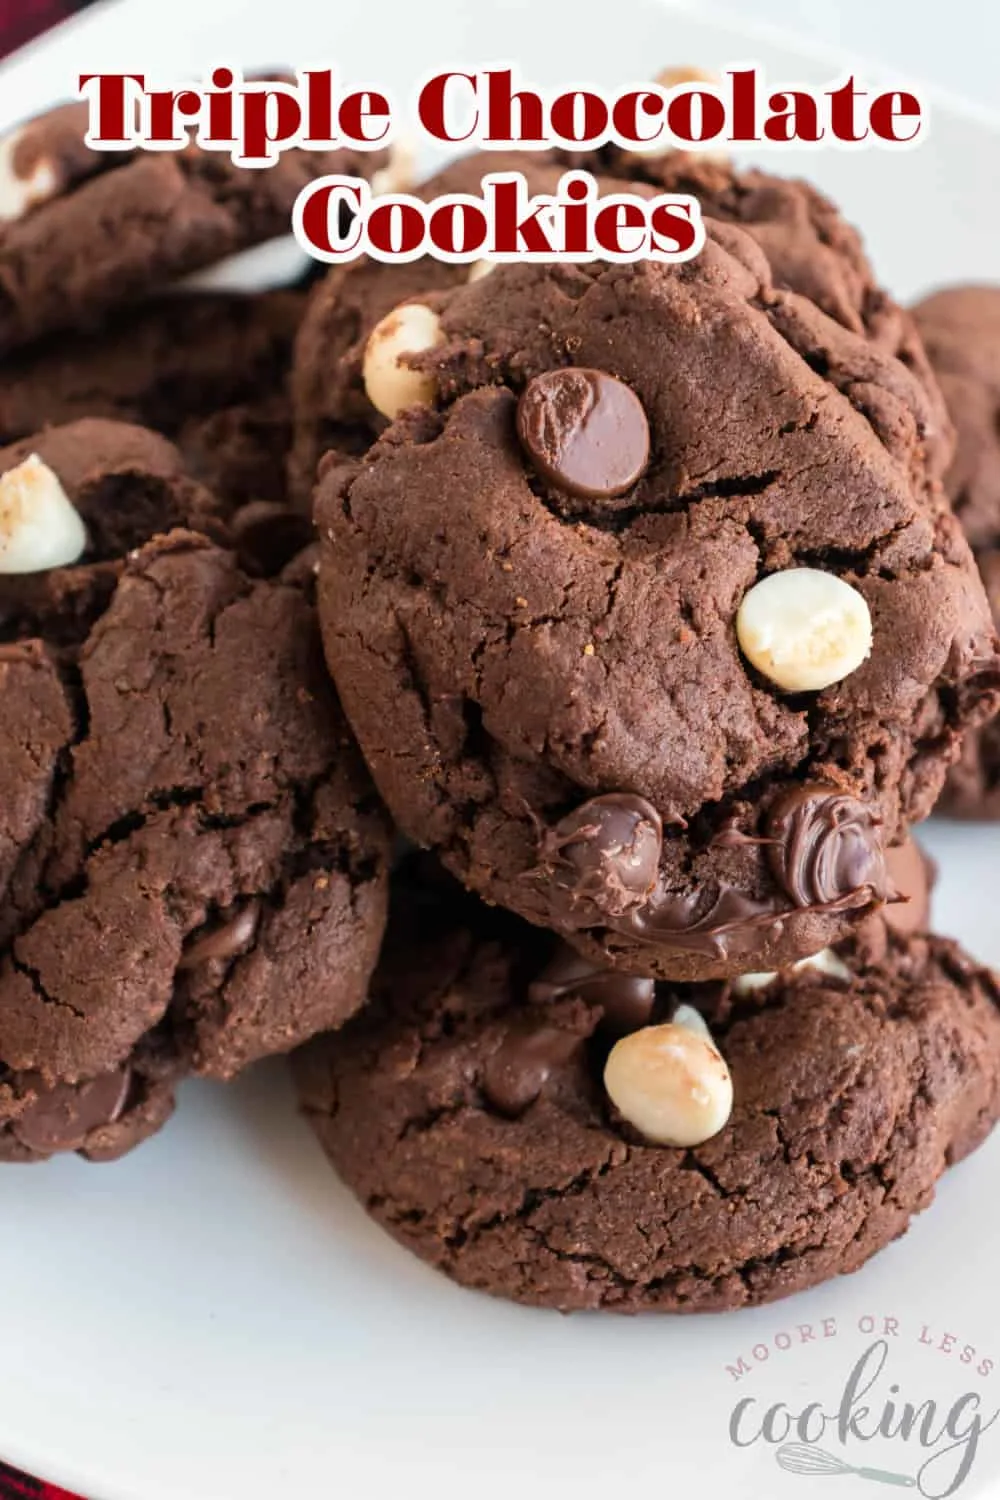 For a serious serving of chocolate, you’ll want to make these outrageously rich and decadent Triple Chocolate Cookies. Go ahead and indulge with this amazingly easy recipe that will most certainly become your new favorite! via @Mooreorlesscook